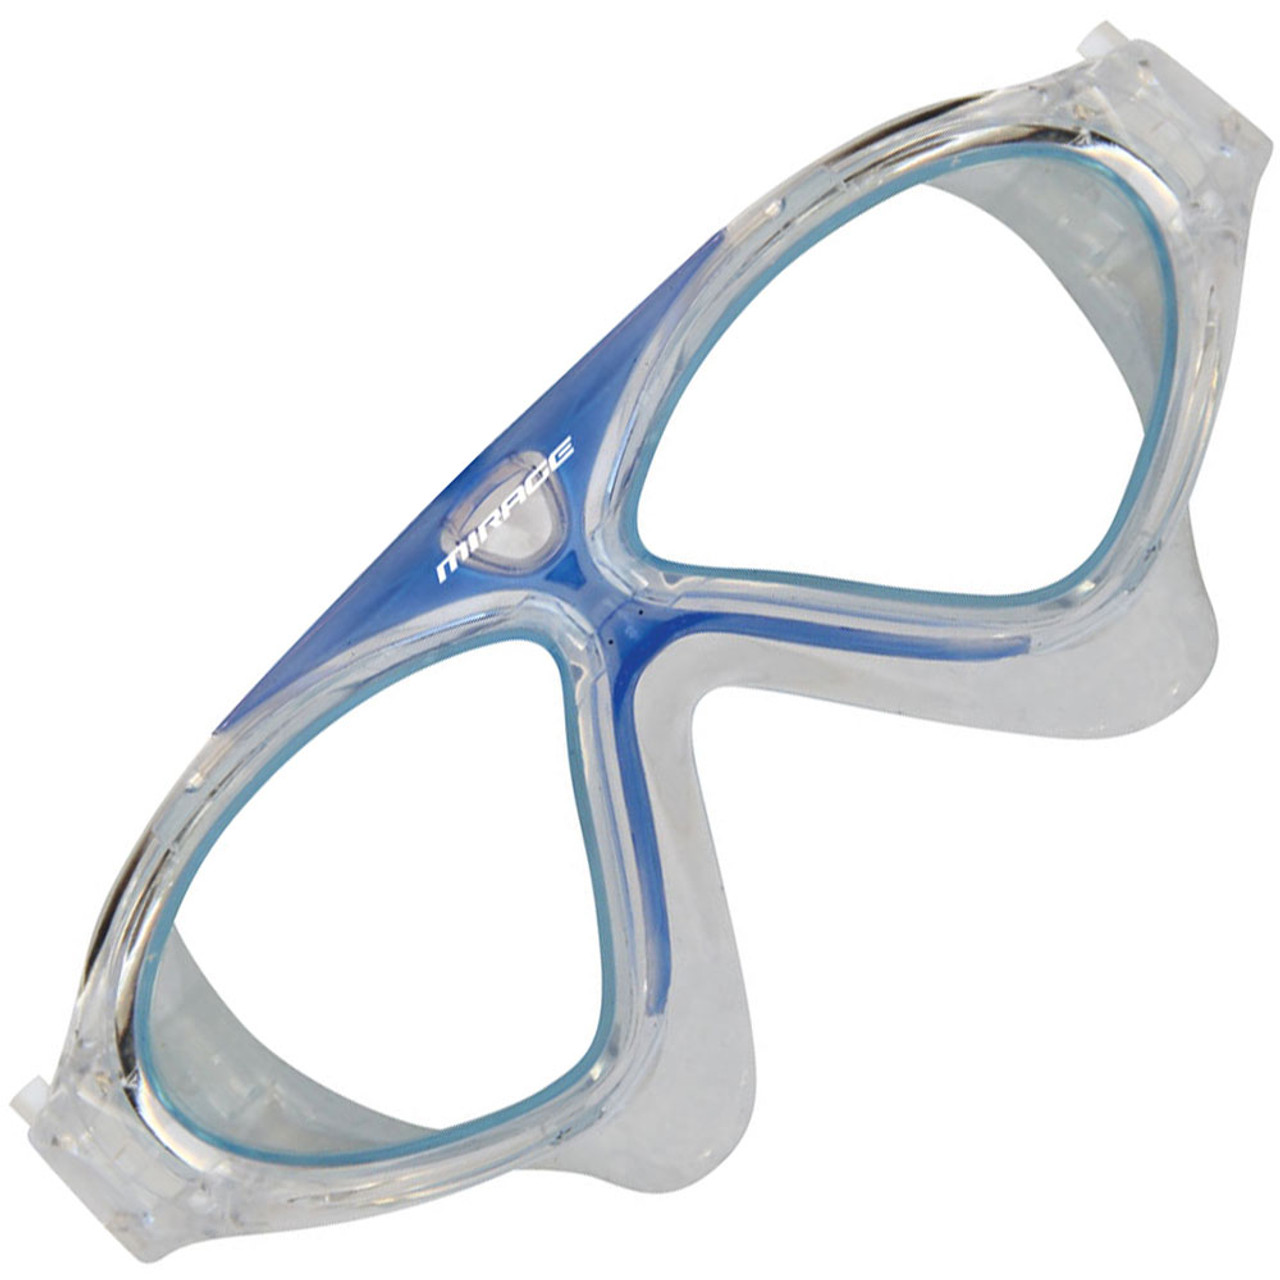 Mirage Lethal Best Swimming Goggles